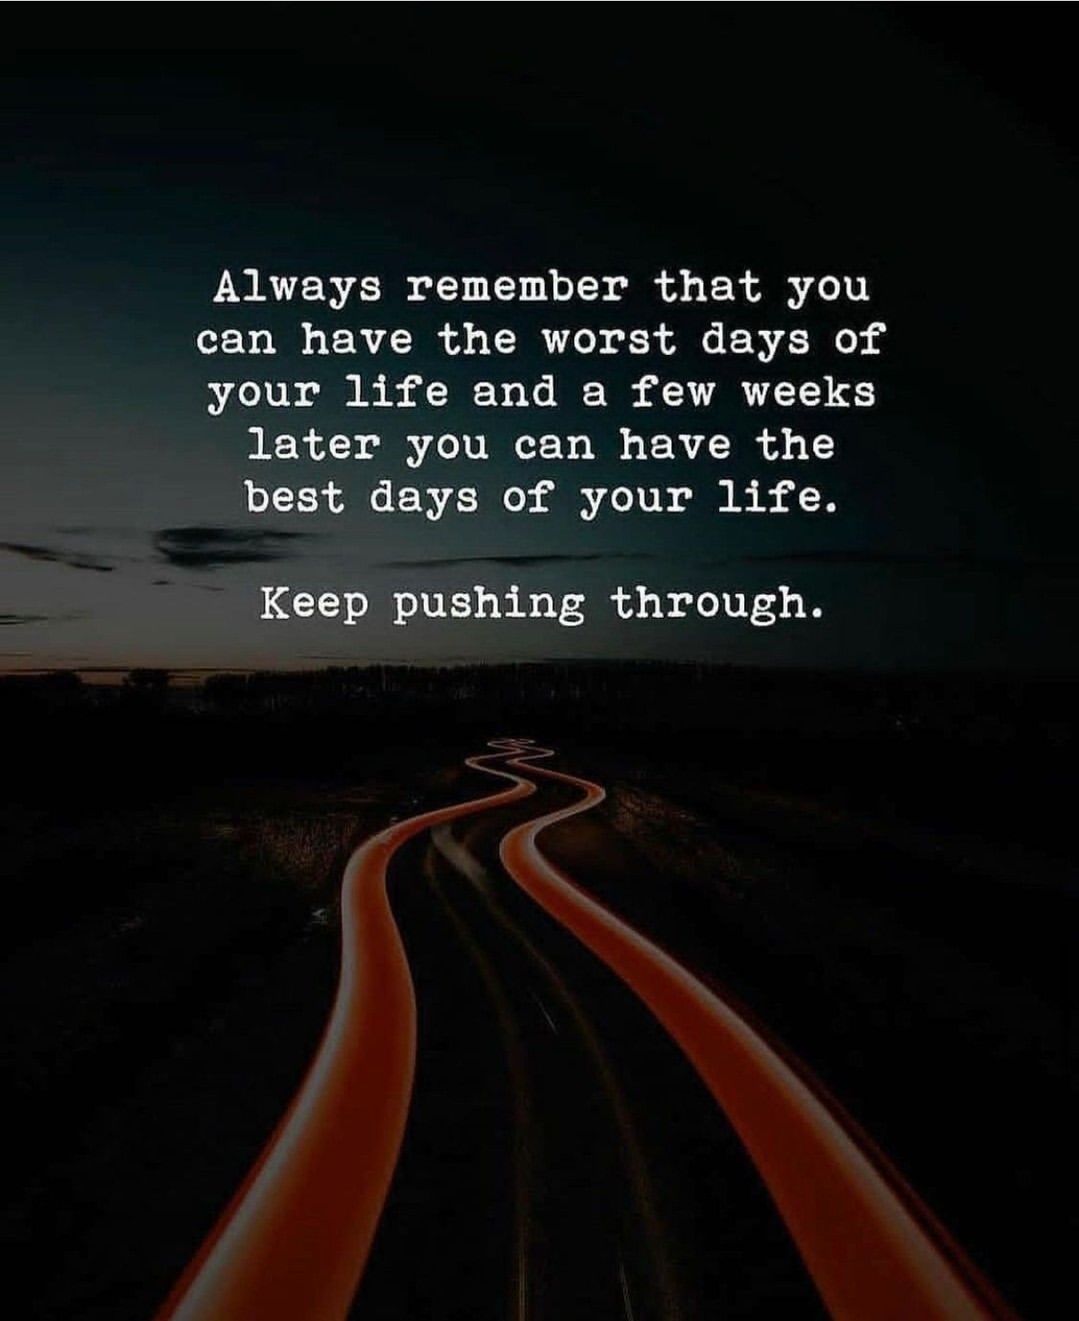 Always remember that you can have the worst days of your life and a few weeks later you can have the best days of your life. Keep pushing through.